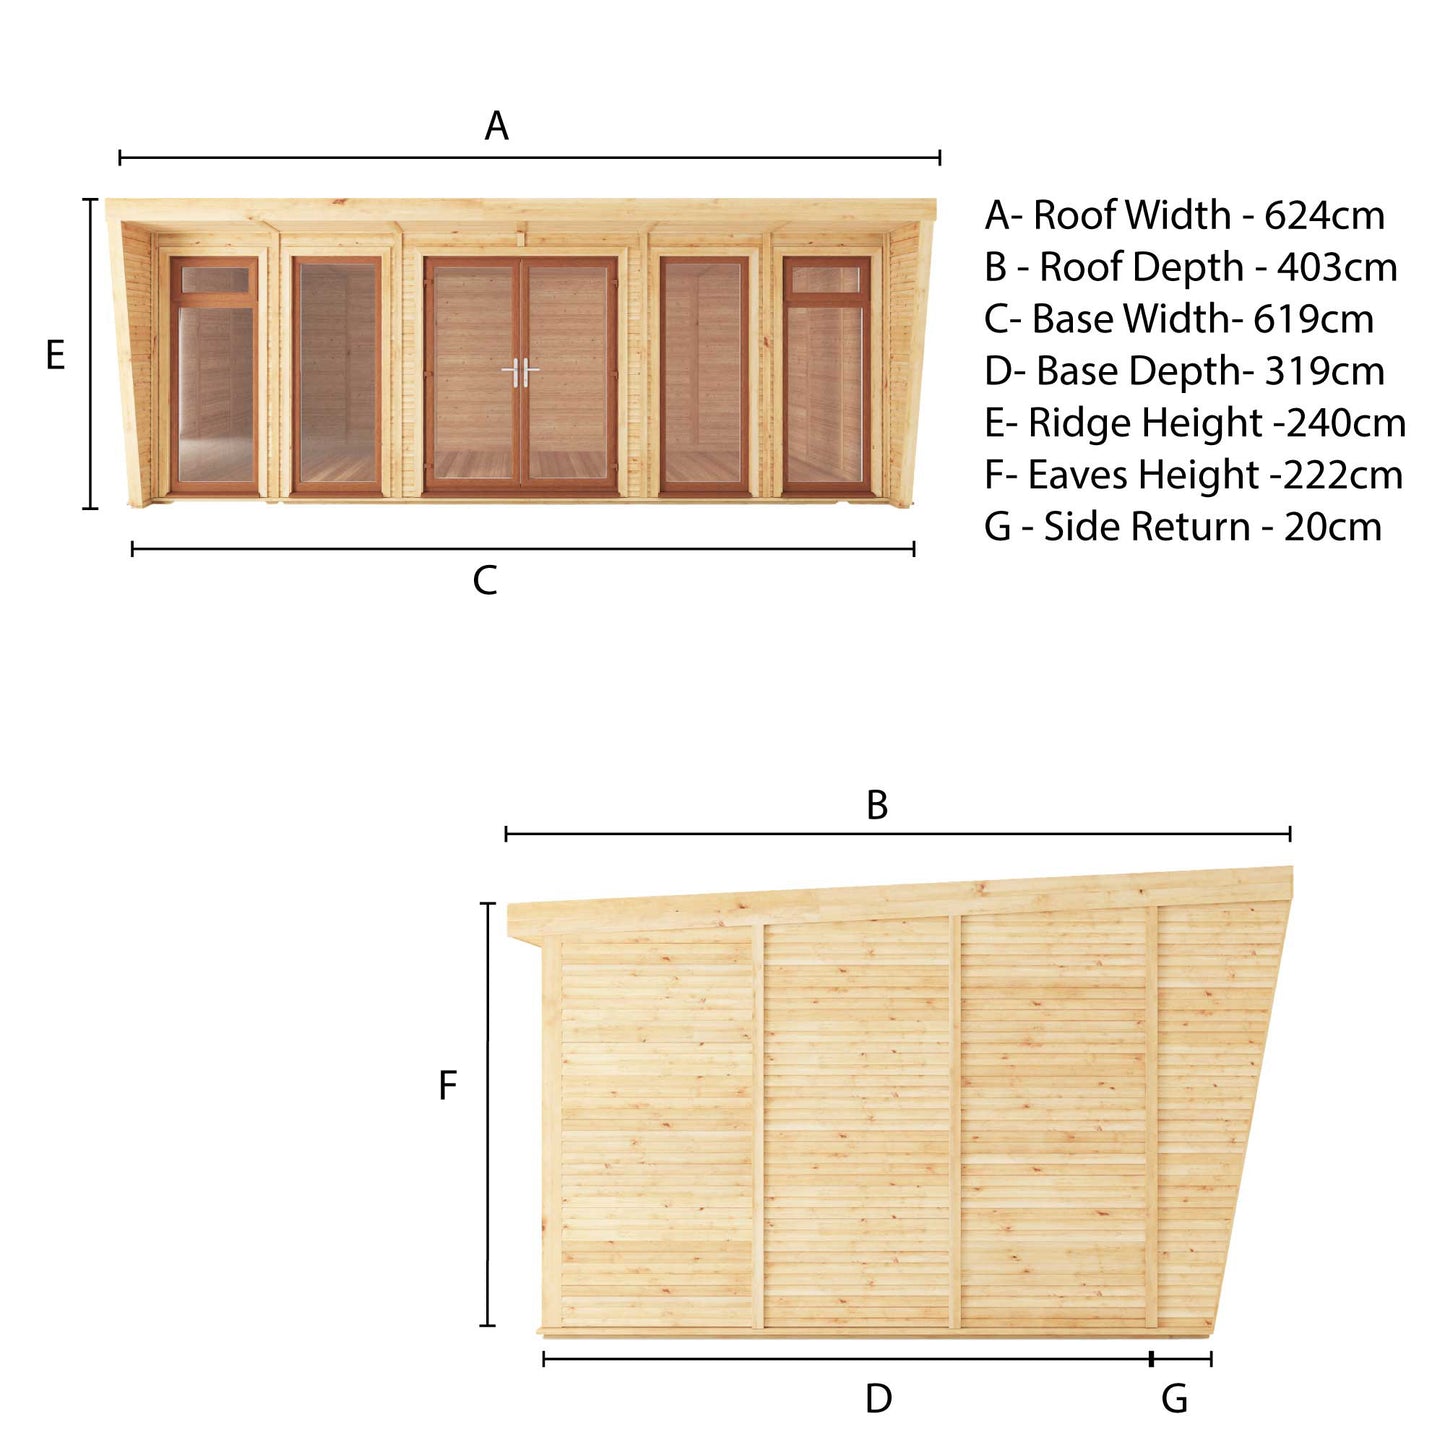 The Harlow 6m x 3m Premium Insulated Garden Room with Oak UPVC